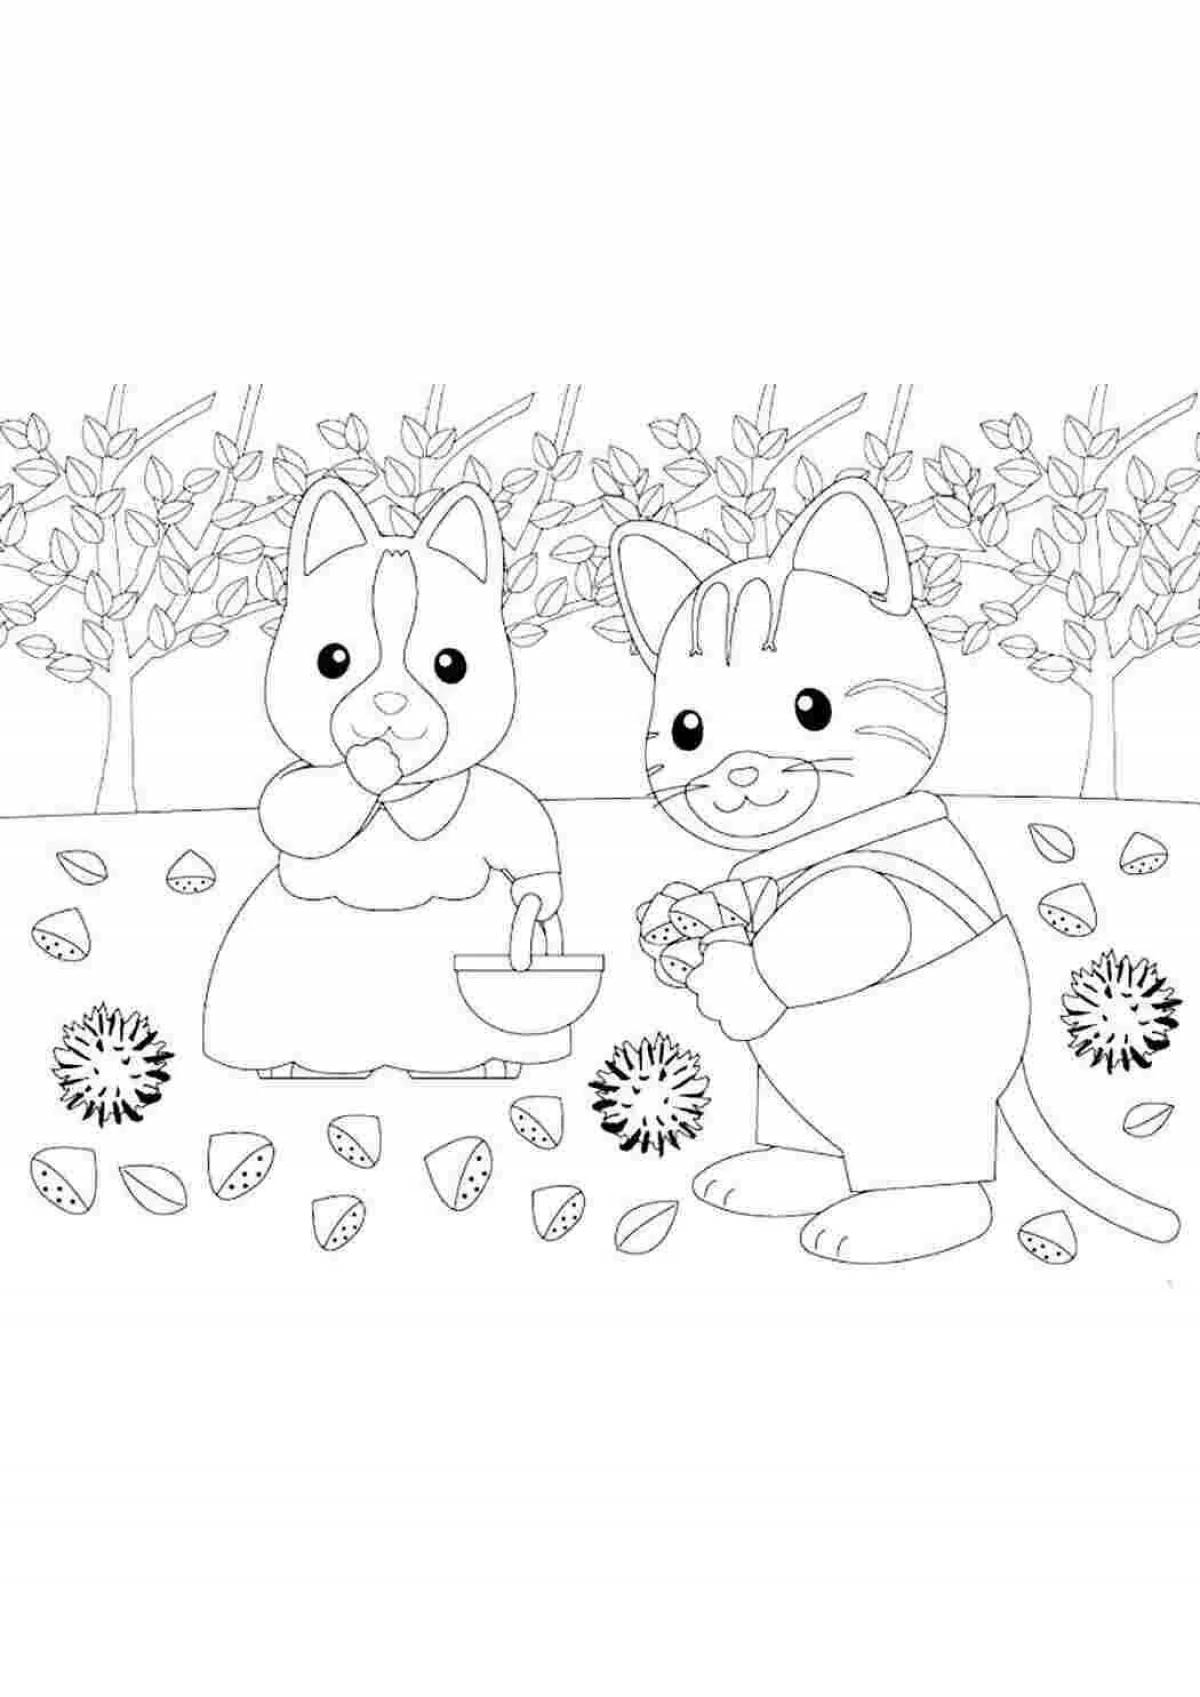 Radiant sylvanian families coloring page